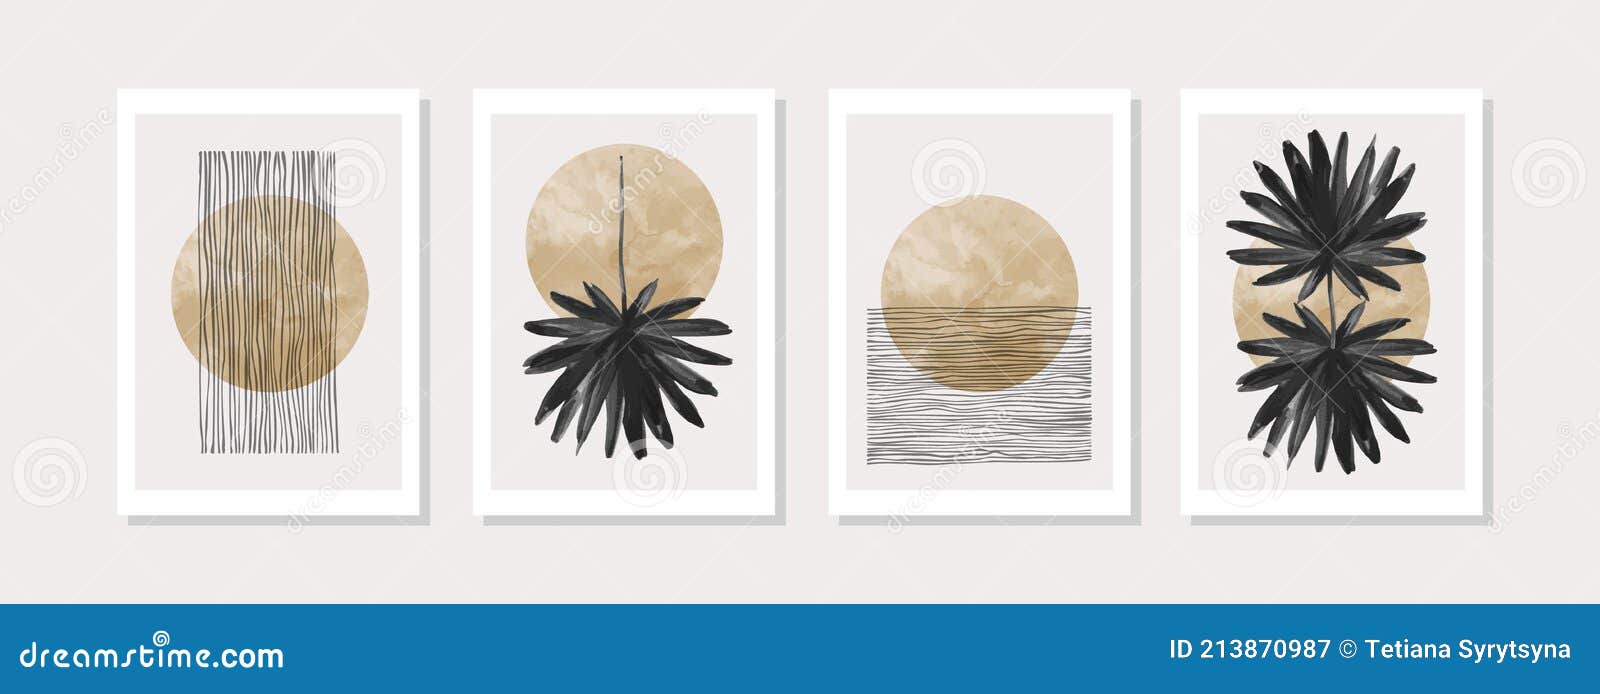 abstract geometric, natural s poster set in mid century style